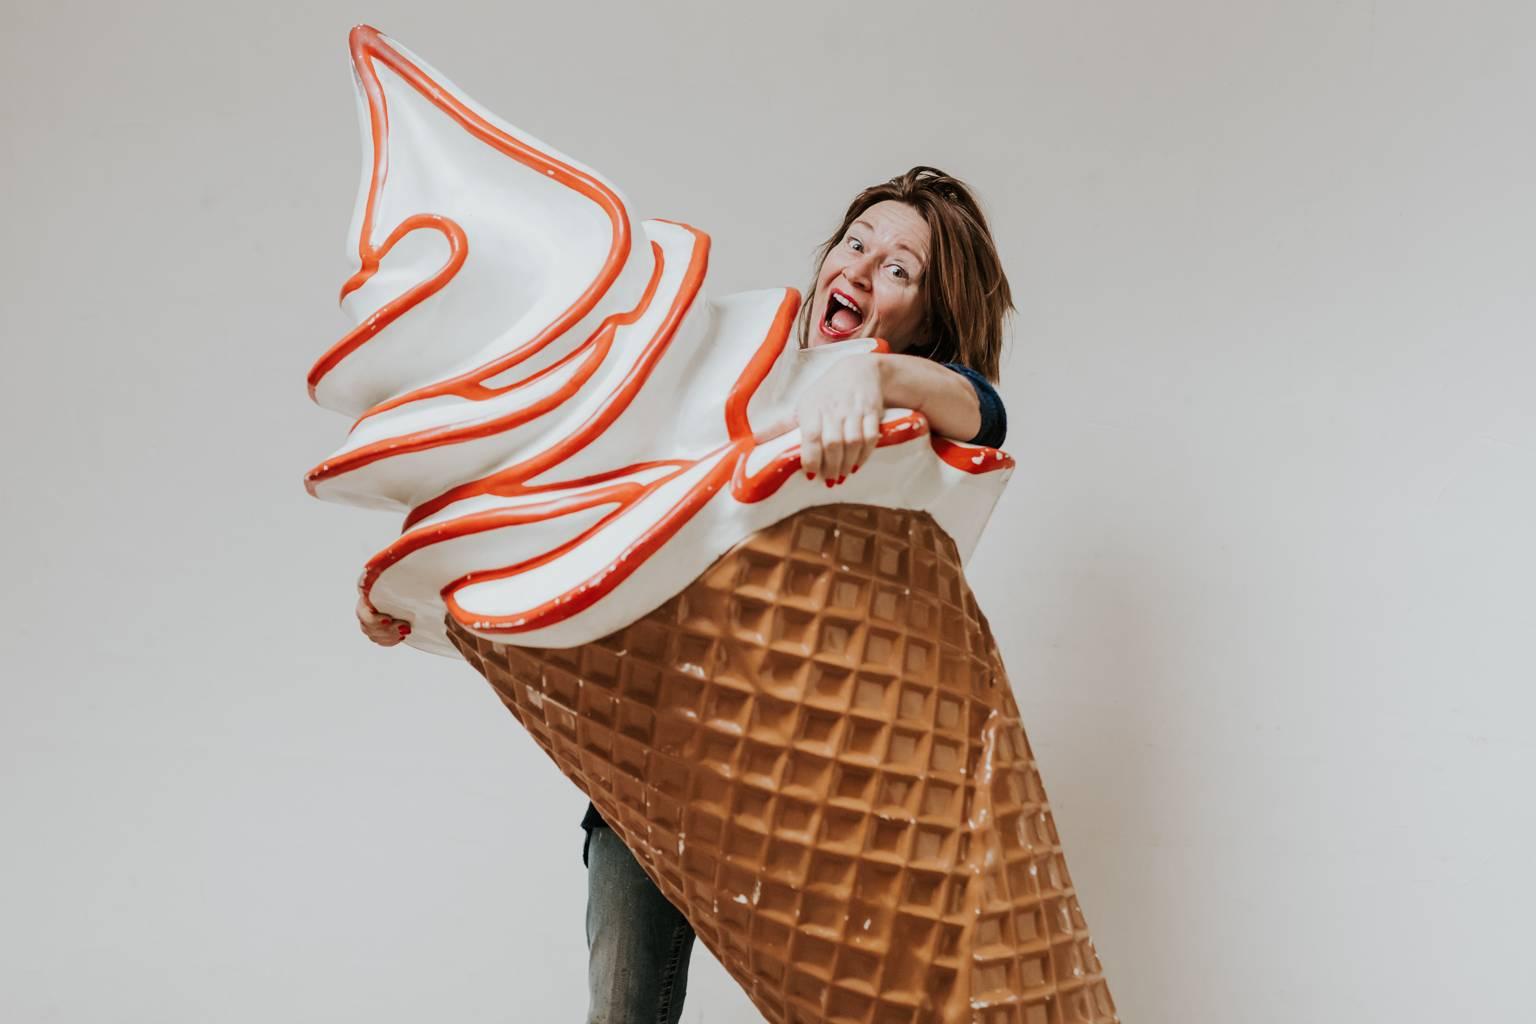 Fun object for lovers of funky, quirky interiors. This extra large publicity ice cream sign just makes you smile.